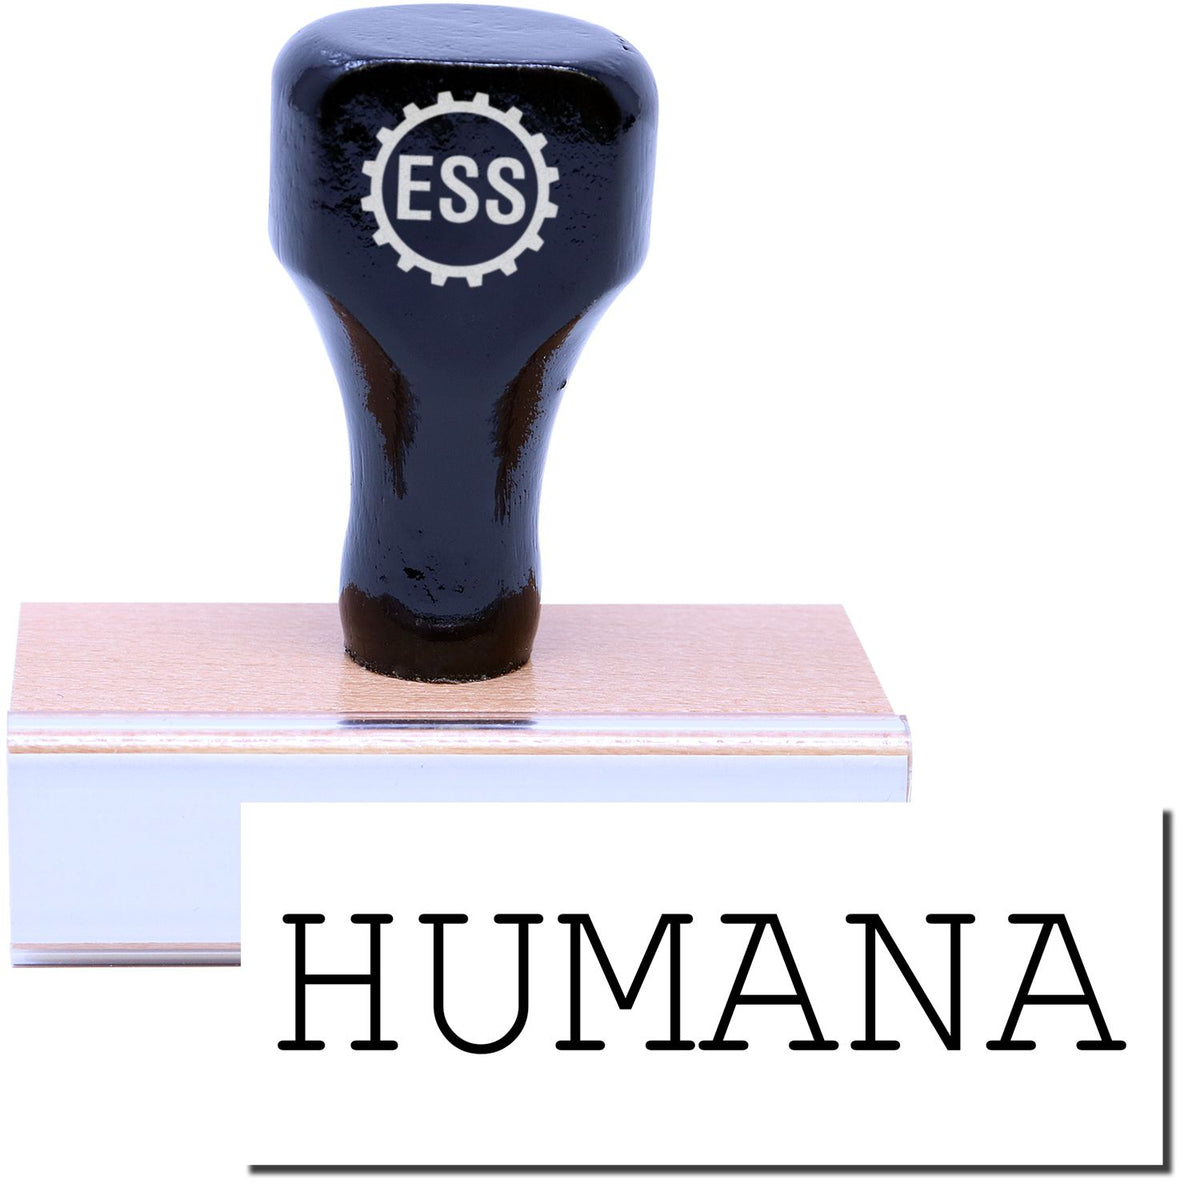 A stock office rubber stamp with a stamped image showing how the text &quot;HUMANA&quot; in a large font is displayed after stamping.